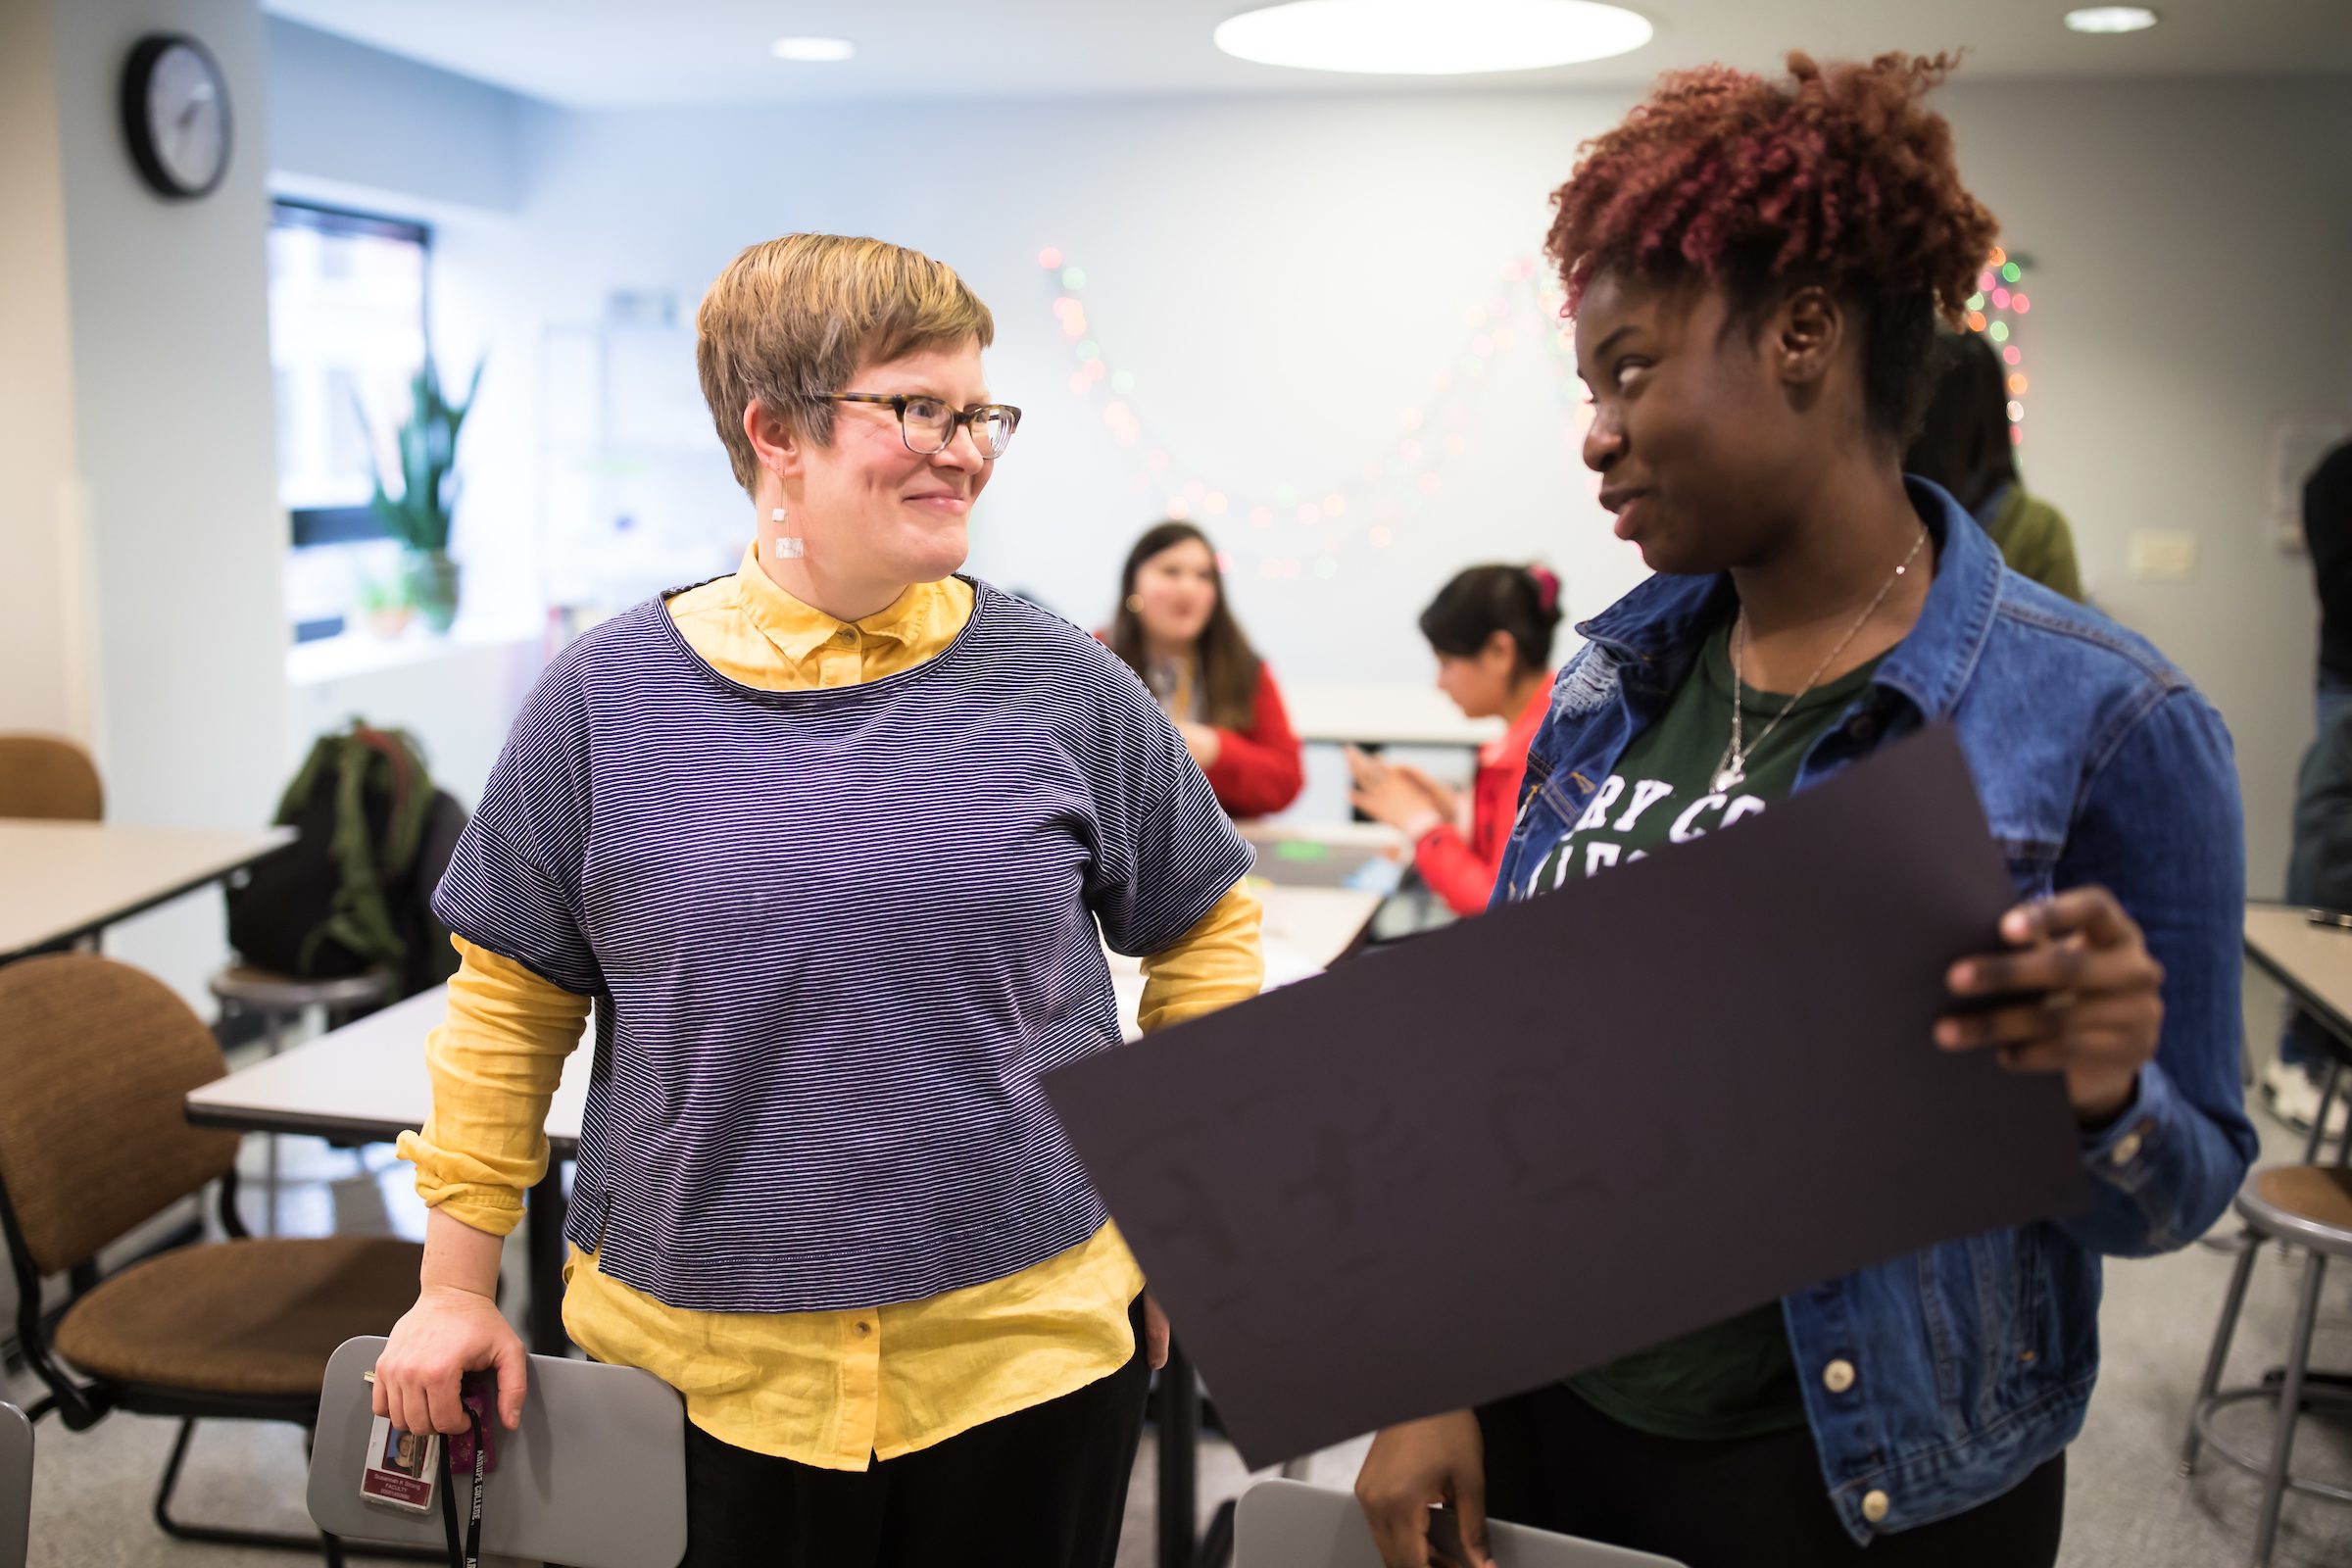 Arrupe College Professor Susannah Kite Strang works with Arrupe students on their art projects in Maguire Hall on February 29, 2019. This year Arrupe College celebrates their second collaboration with the Loyola University Museum of Art. Student projects individually developed out of class will be featured, alongside photographs and 2-dimensional work from Arrupe’s inaugural Foundation Studio/2D-Design class. This exhibition will be curated by Susannah Kite Strang, professor at Arrupe College.(Photo: Lukas Keapproth)